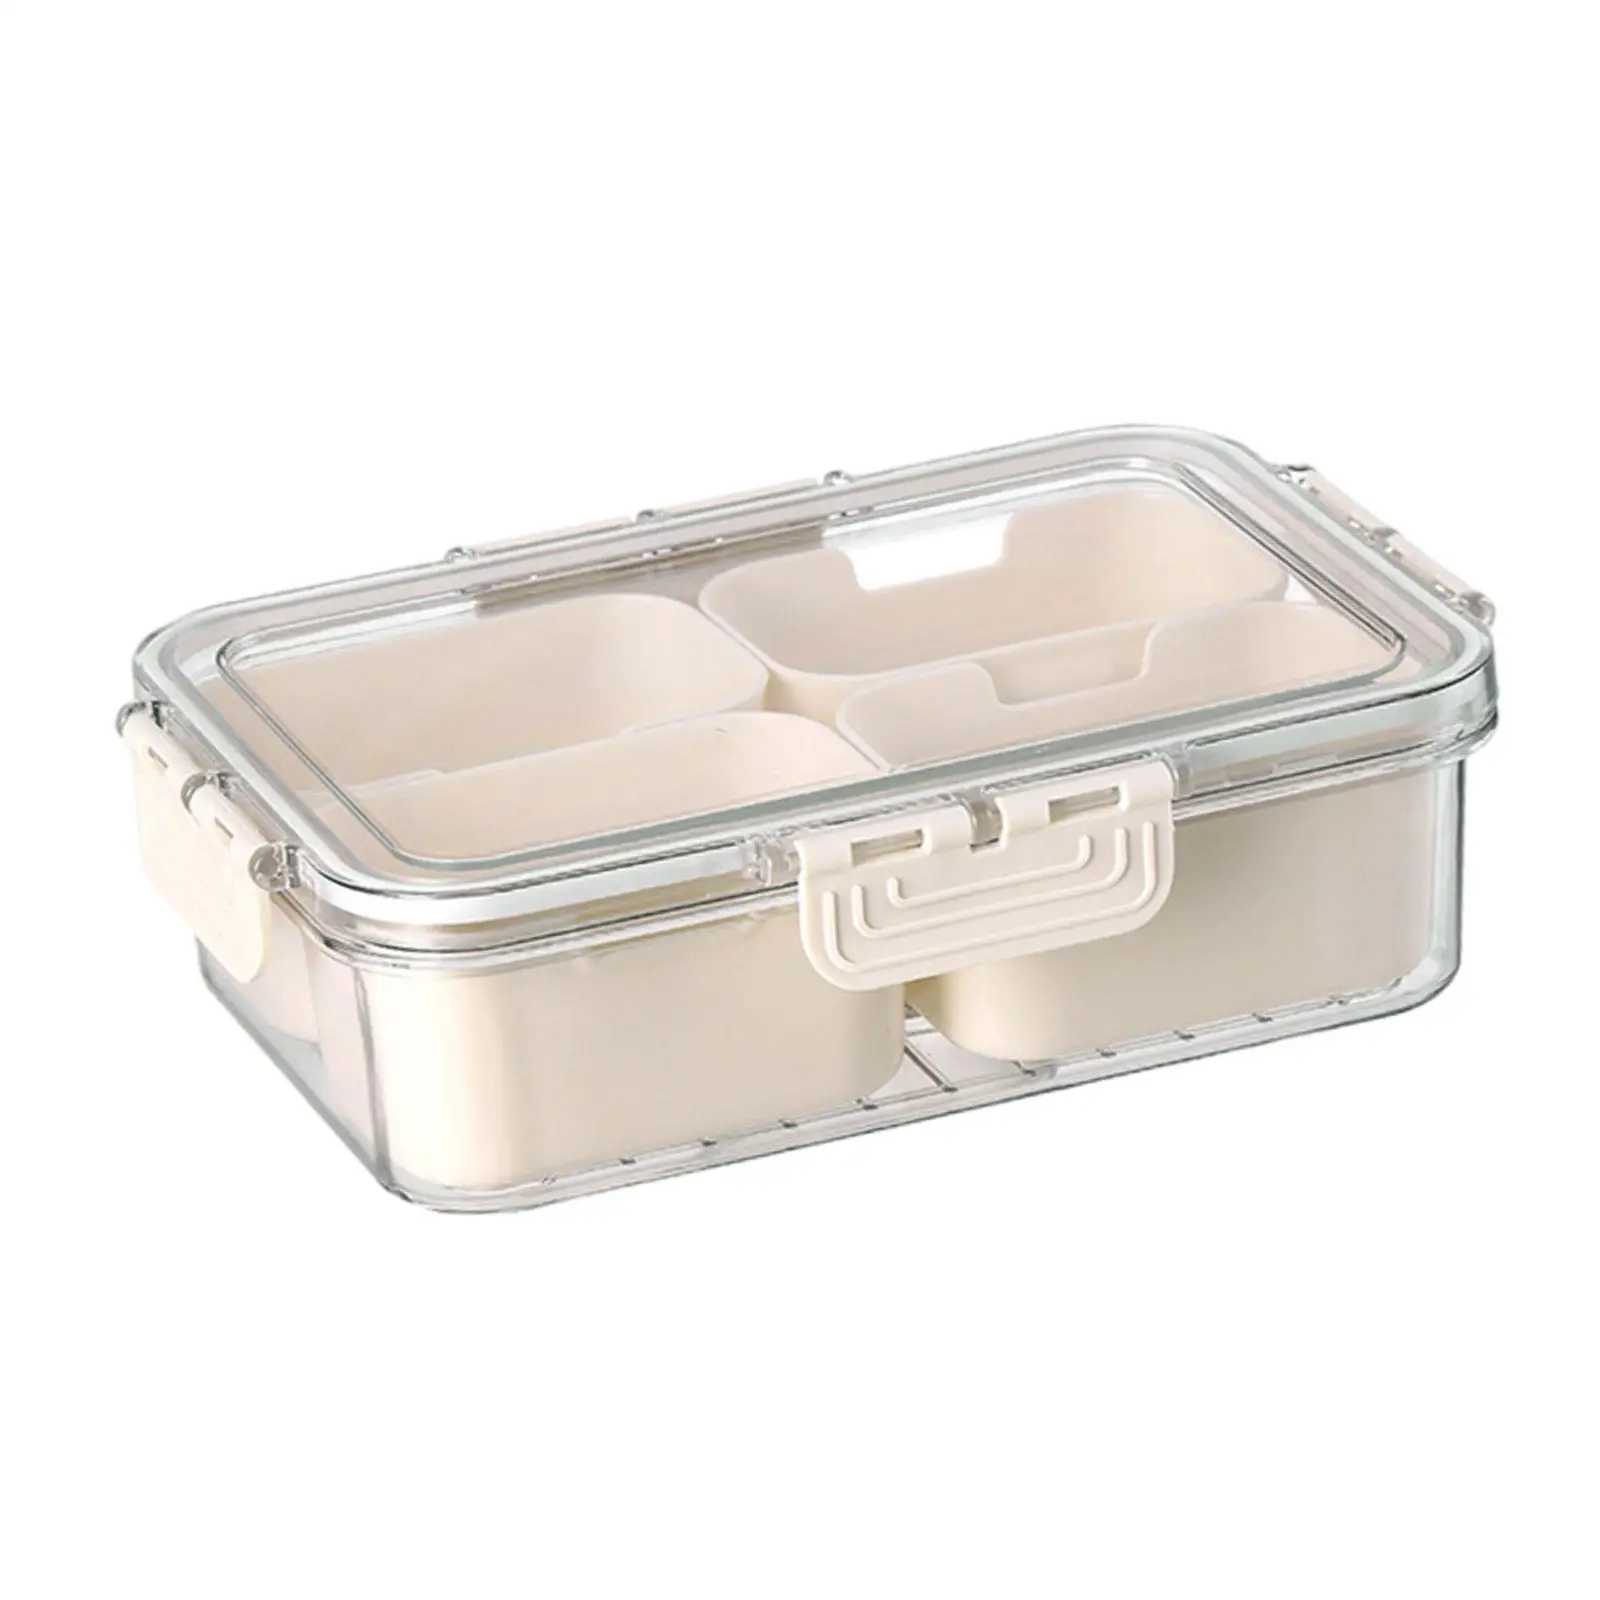 4 Compartments Snack Tray Serving Platter with Lid Square Divided Serving Tray for Hot Pot Prep Chip Biscuits Desserts